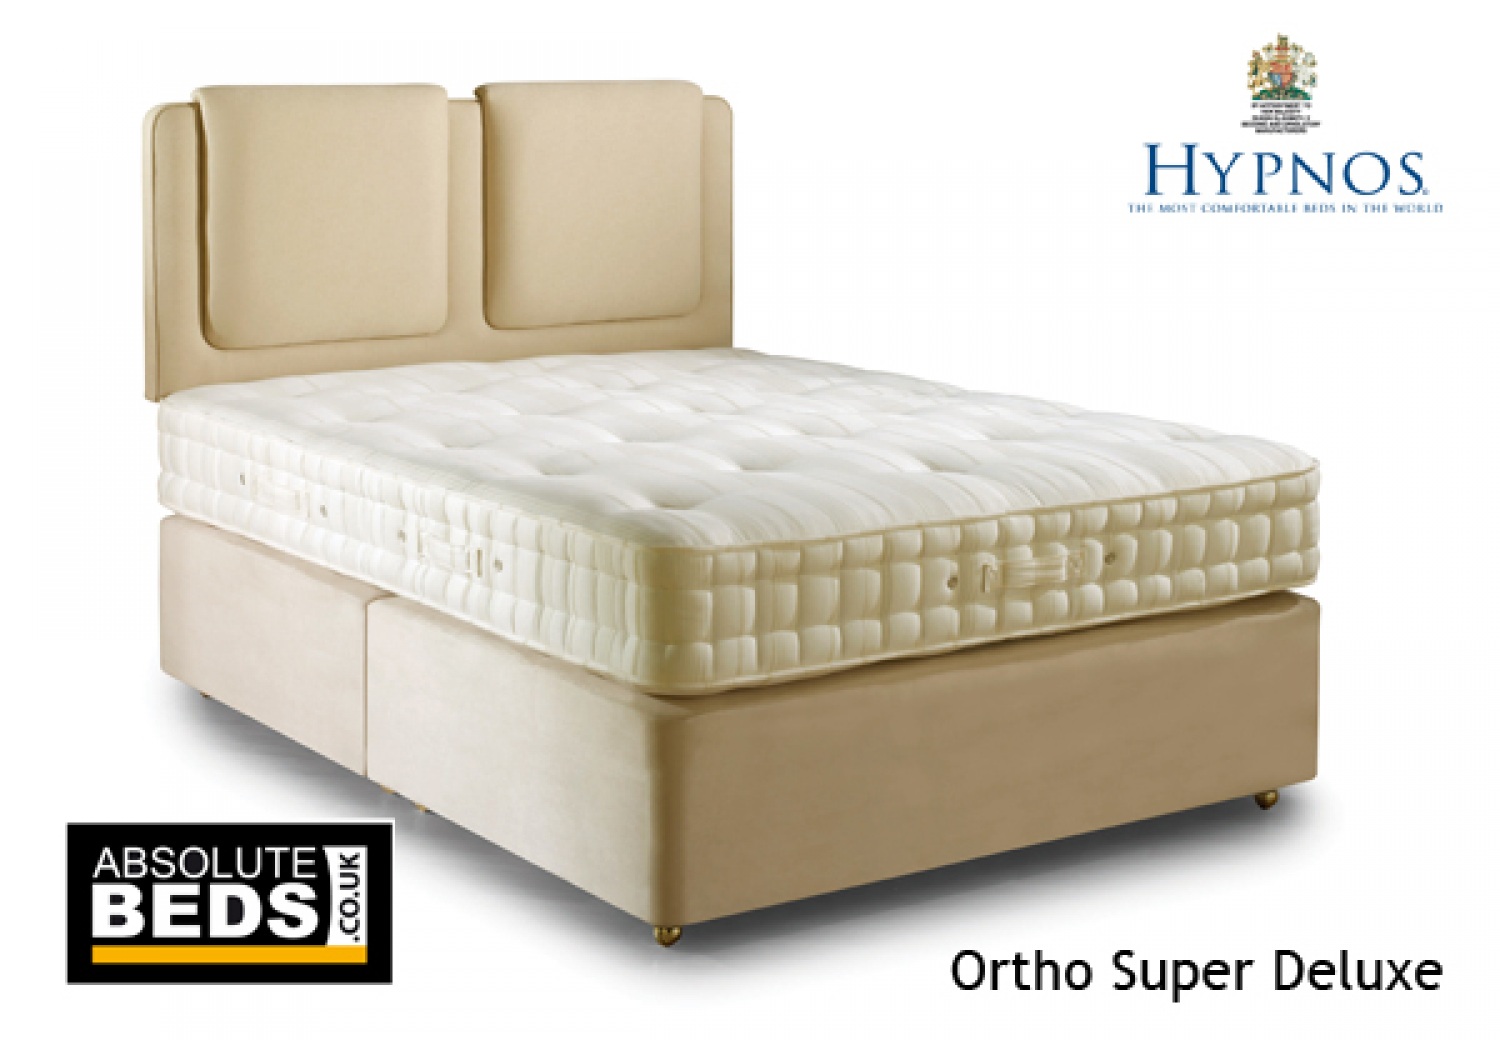 Hypnos Ortho Super Deluxe 1300 Pocket Sprung Mattress image